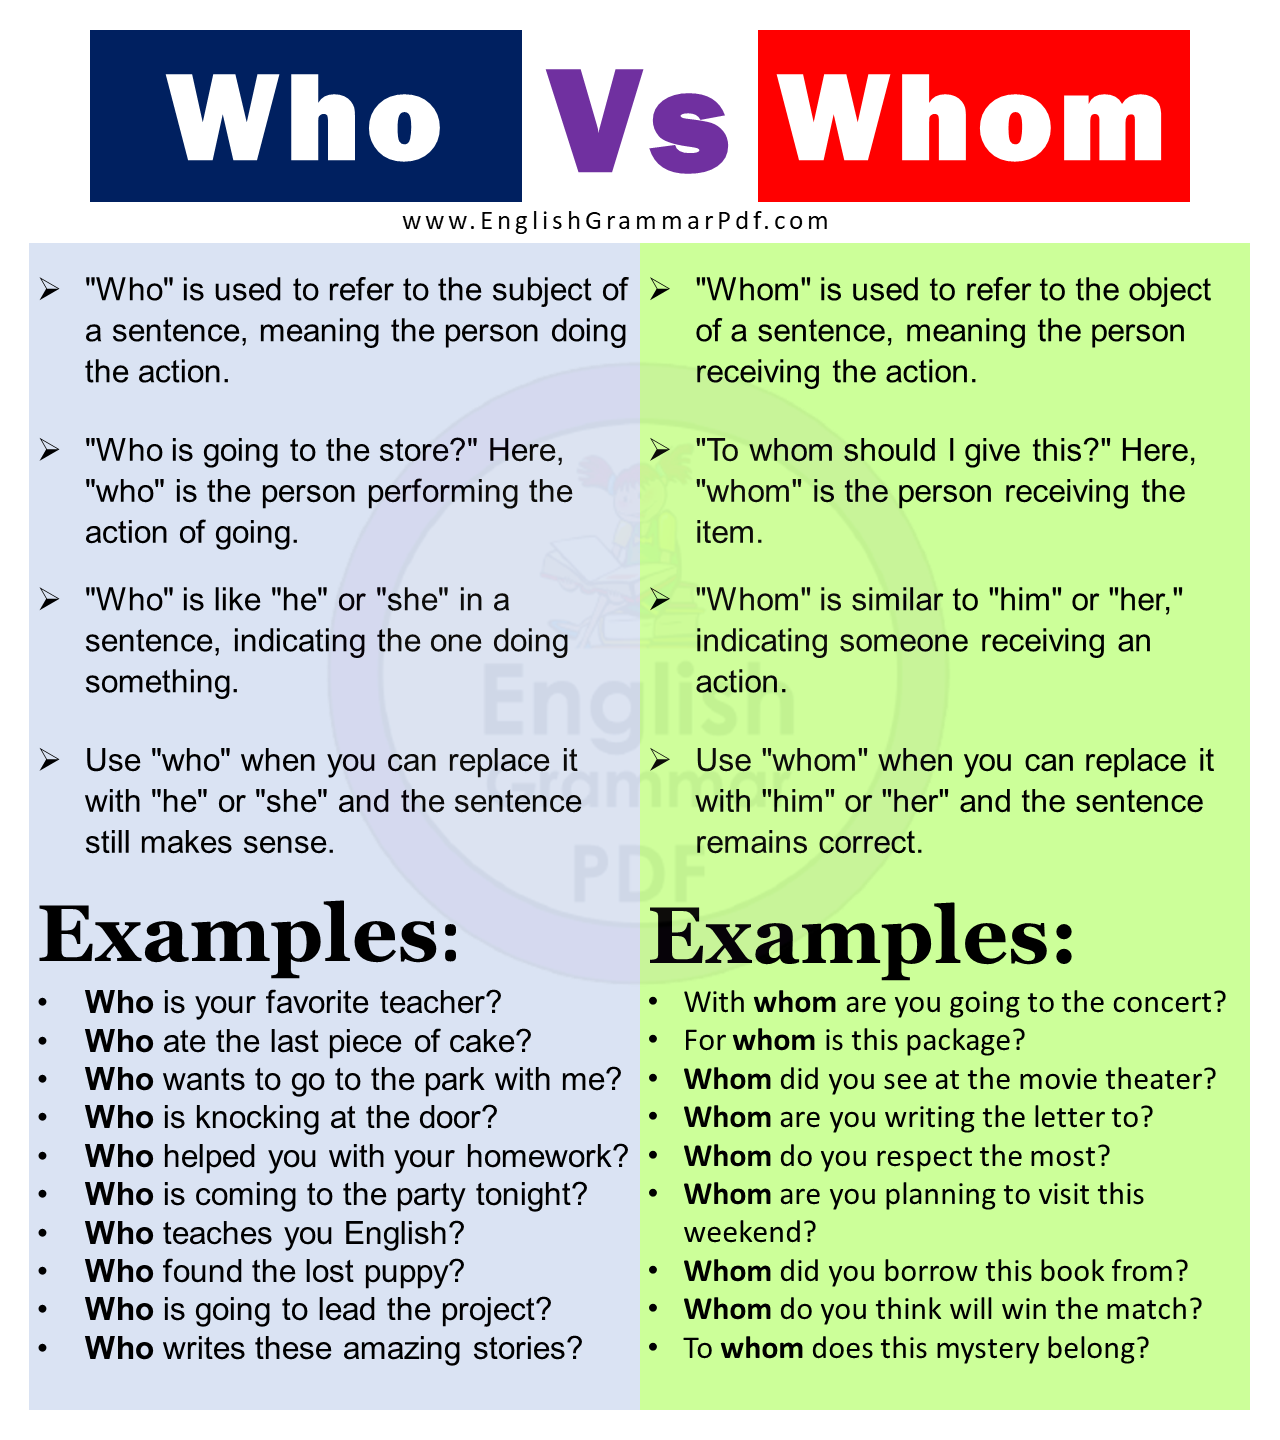 difference between who vs whom